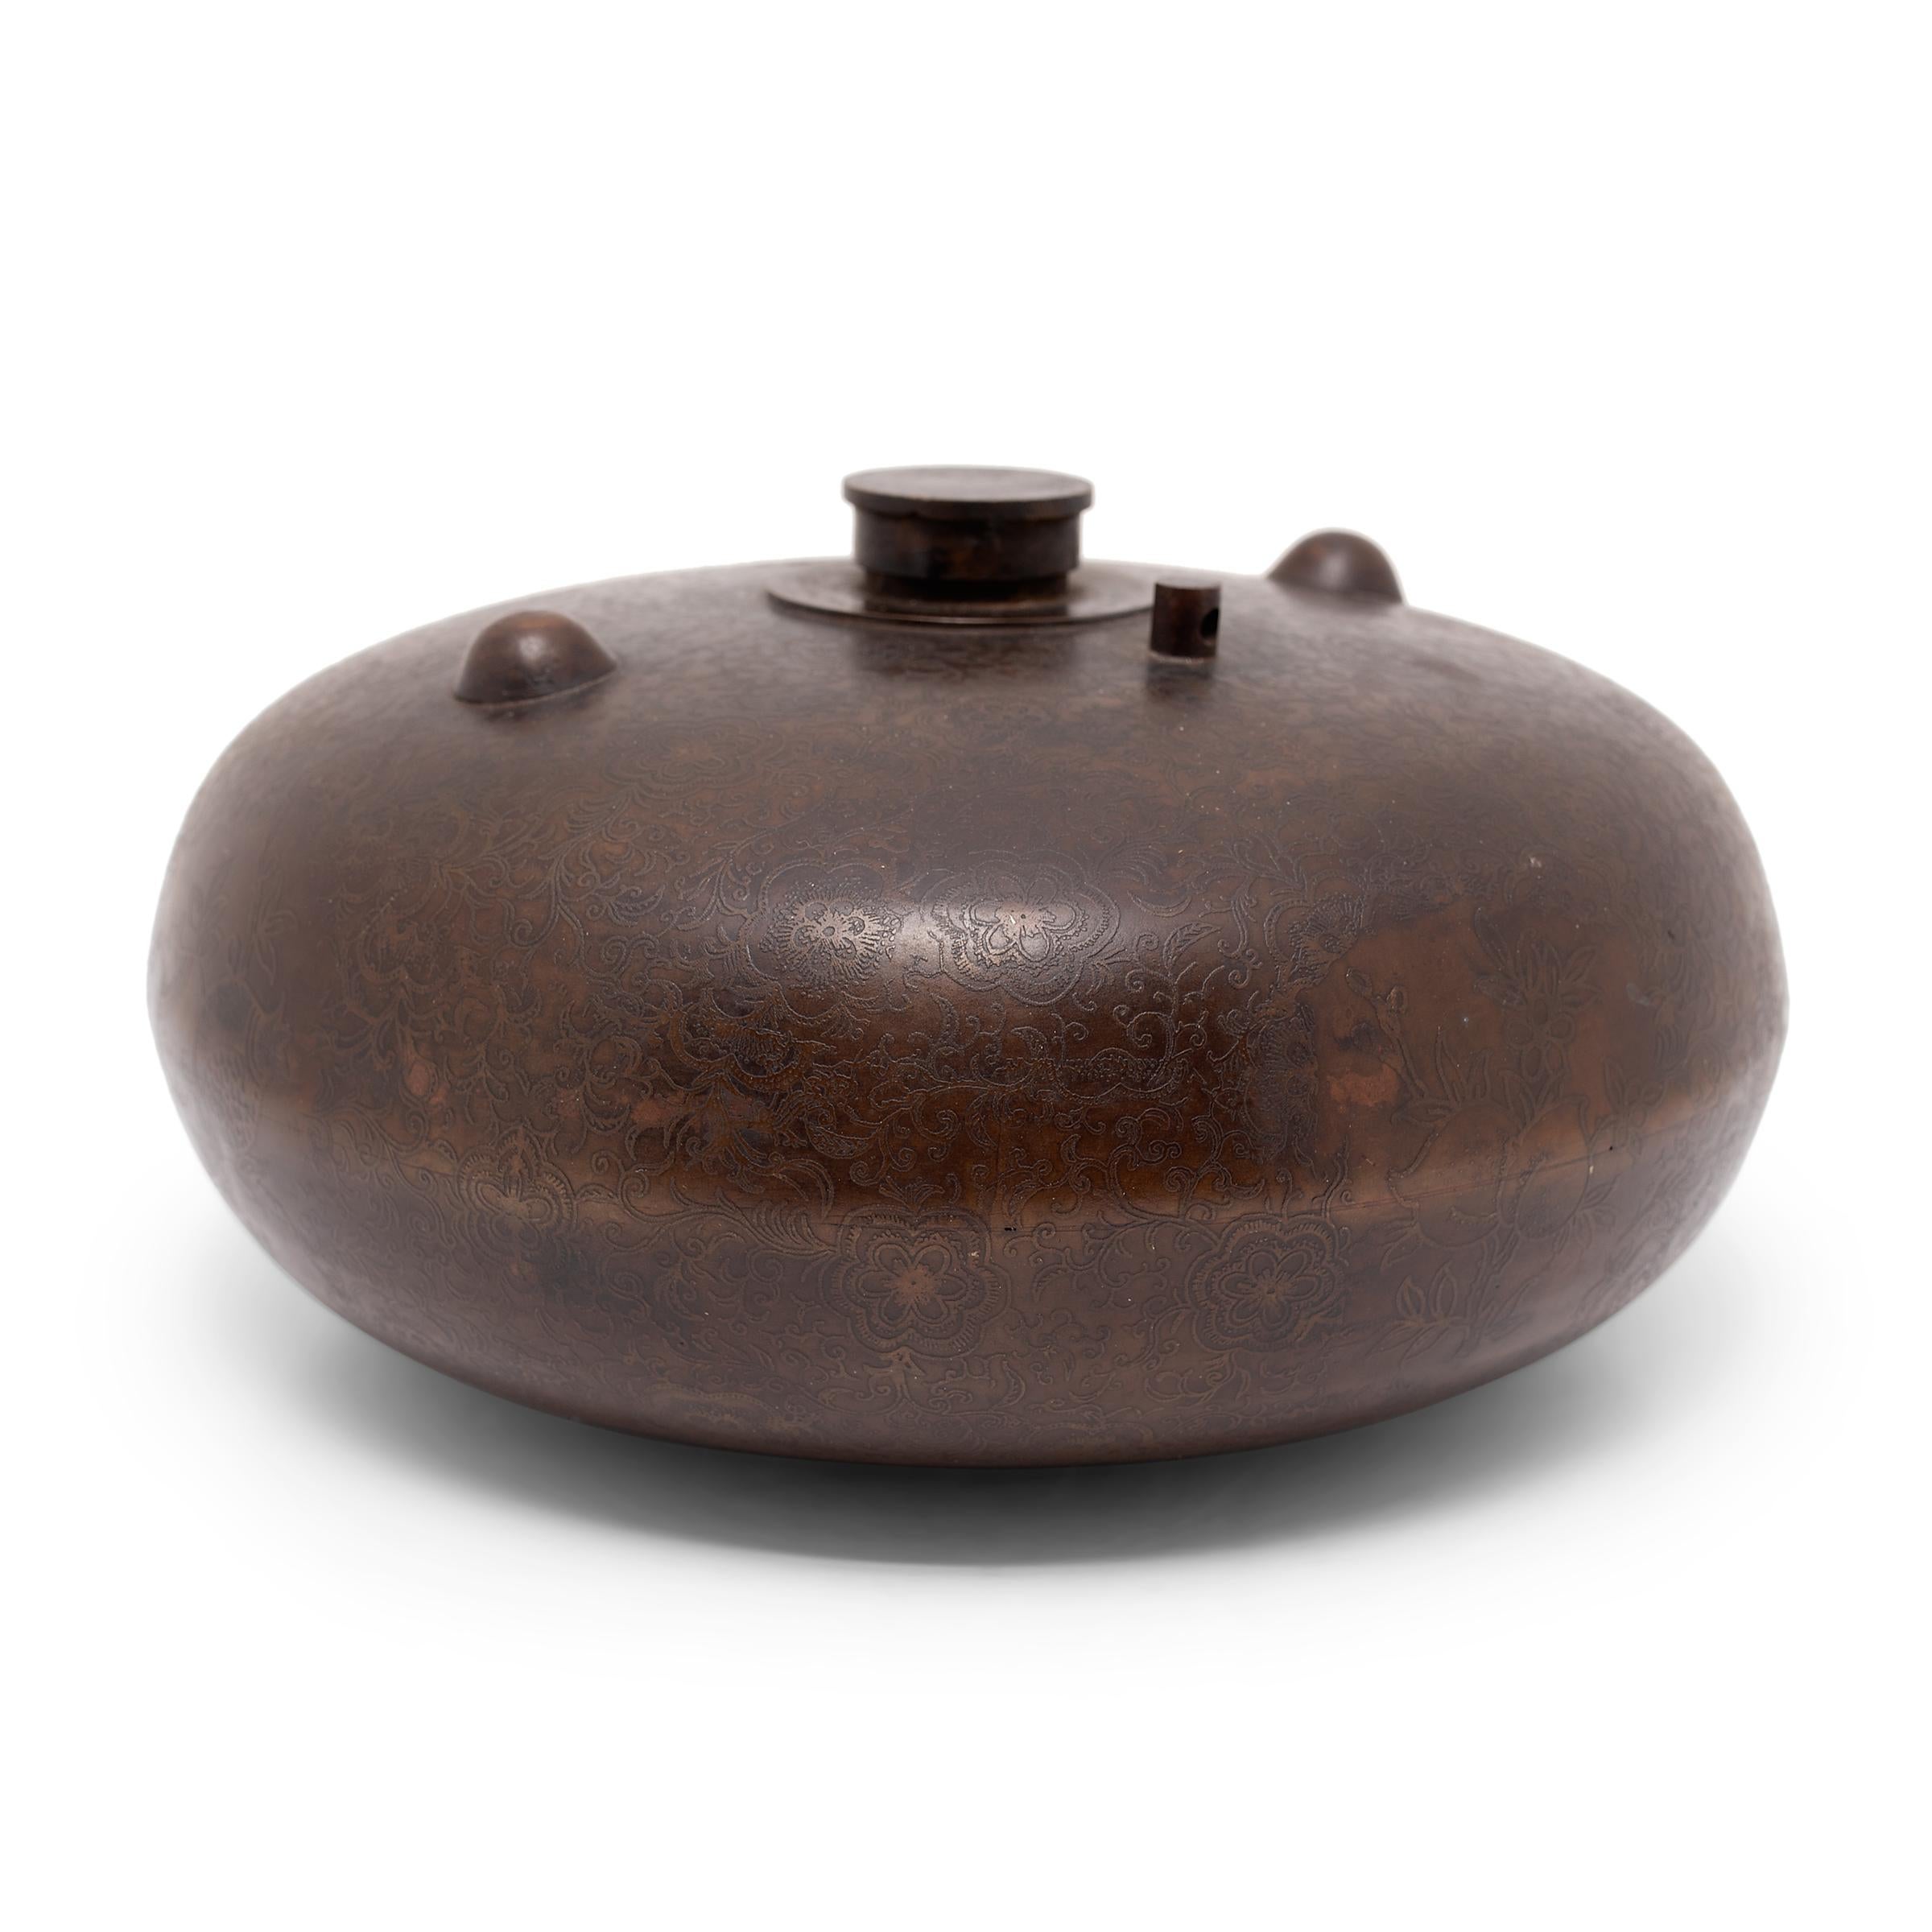 This squat brass vessel is an early Qing-dynasty hot water bottle, originally used to heat a bed or warm the body. The round container would have been filled with hot water through the narrow top opening and used to slowly radiate warmth. In